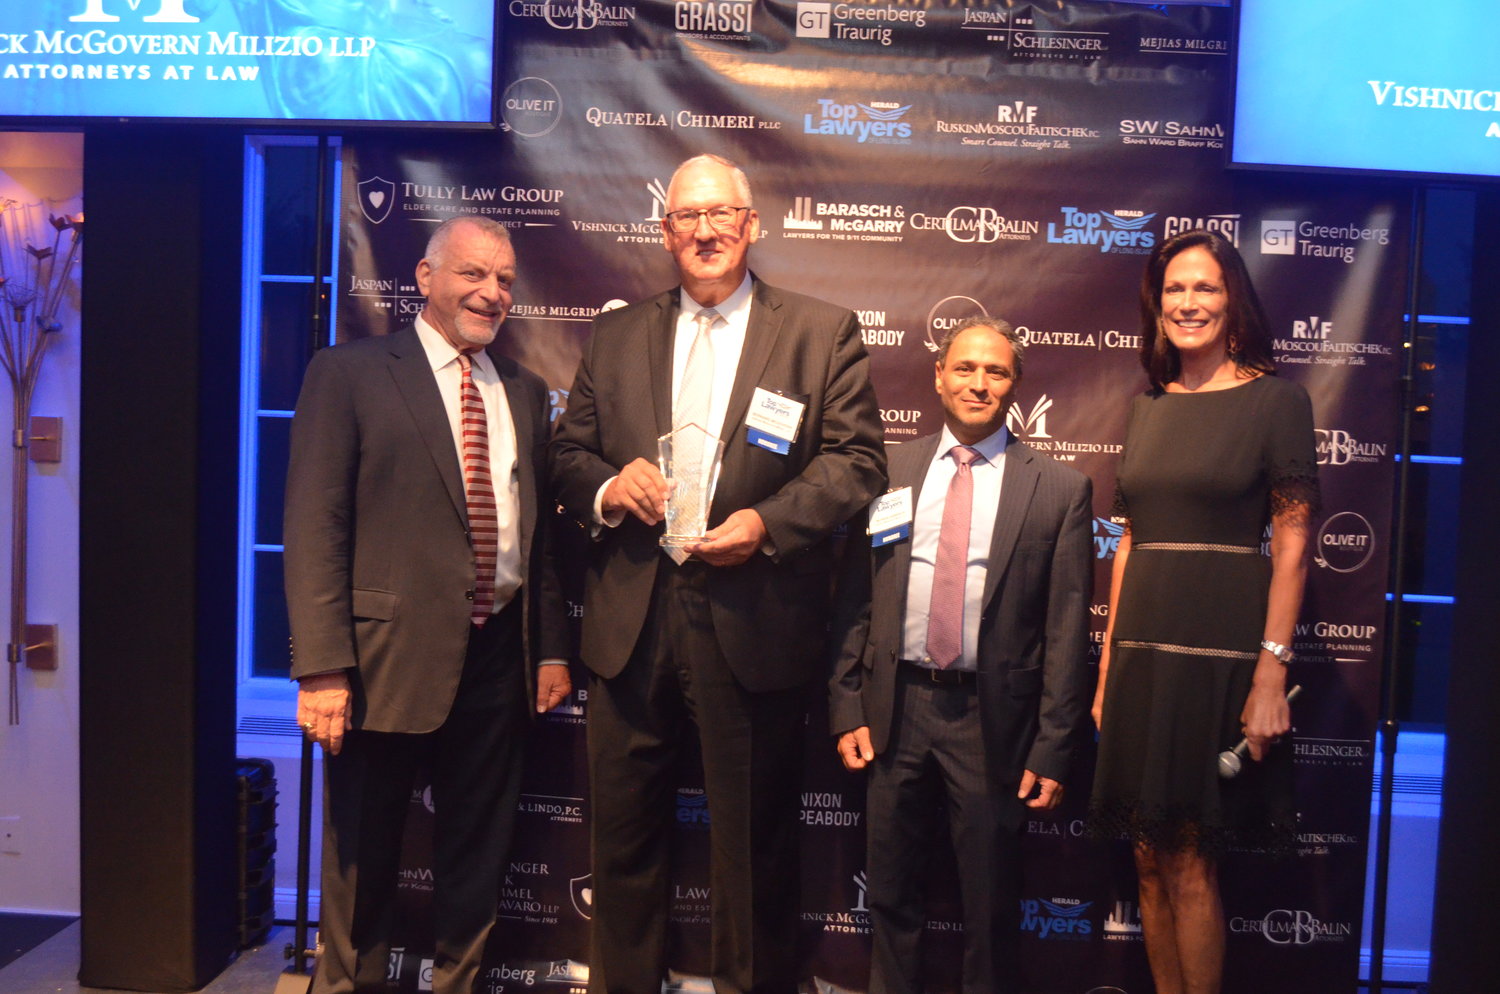 Cliff Richner and Host Judy Goss pose with Bernard McGovern and Morris Sabbagh from Vishnick McGovern Milizio LLP. Vishnick McGovern Milizio LLP won Top Law Firm (11-50 Employees).